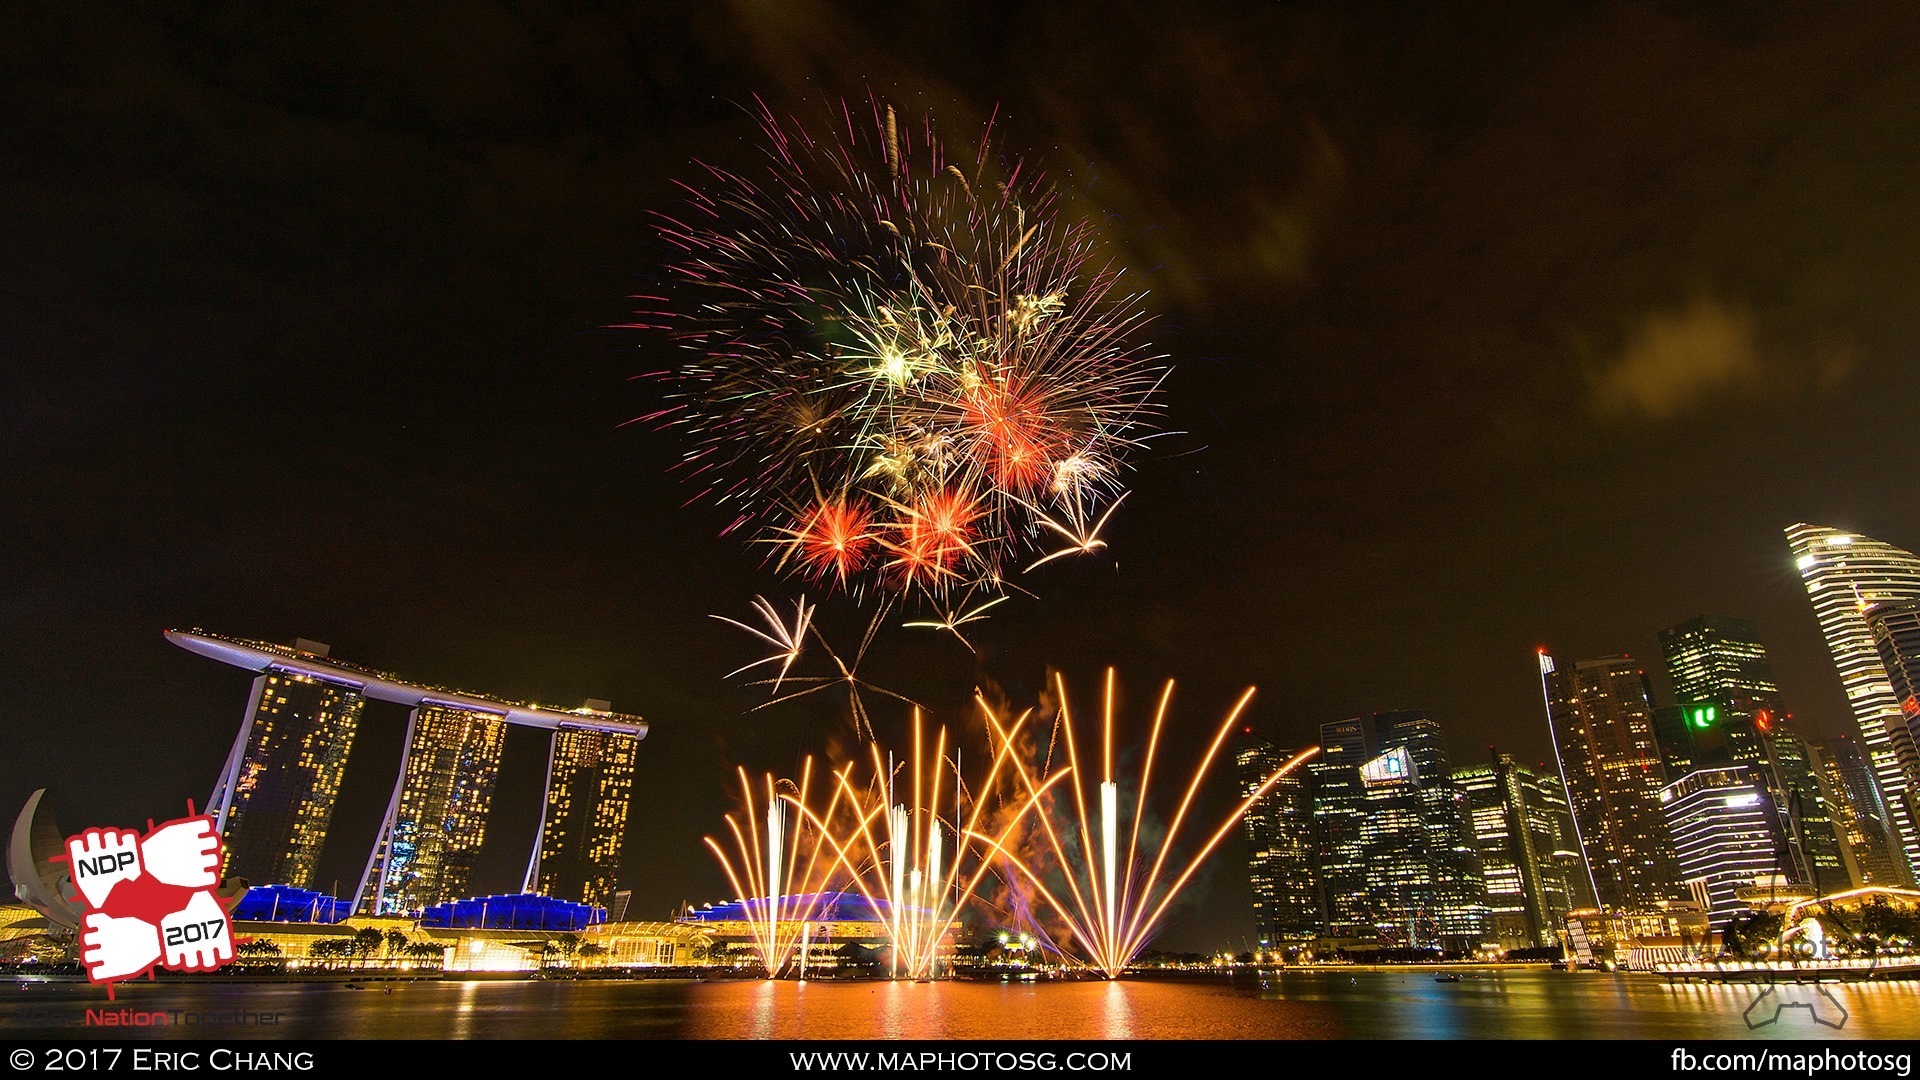 39. Fireworks from the Esplanade Waterfront.